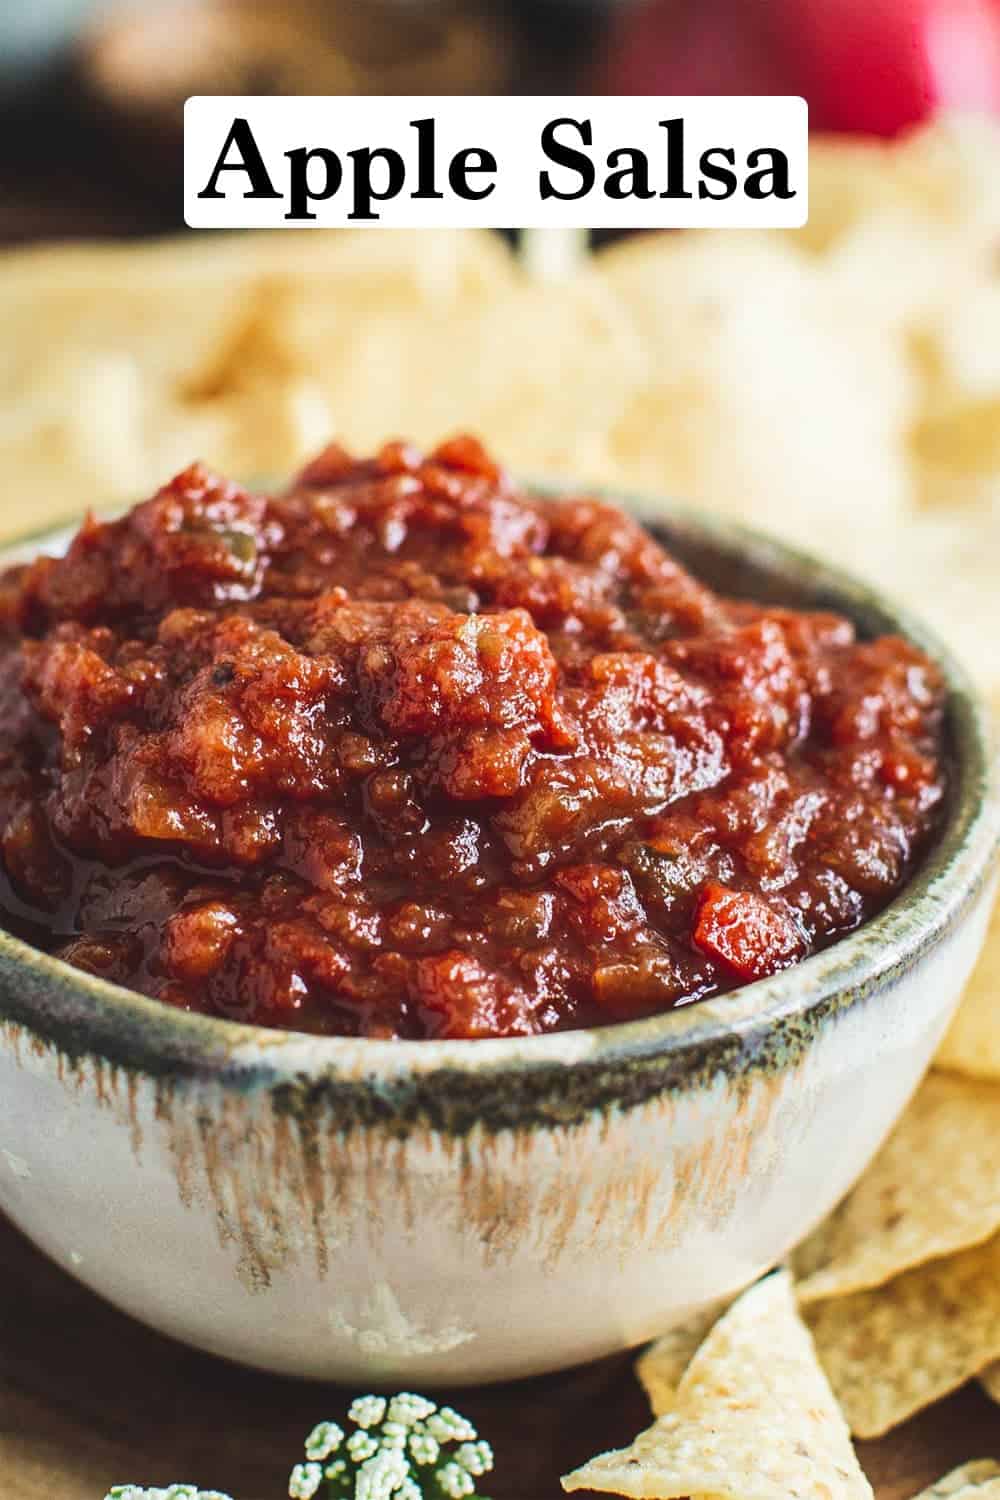 Apple salsa in a bowl with tortilla chips around it.